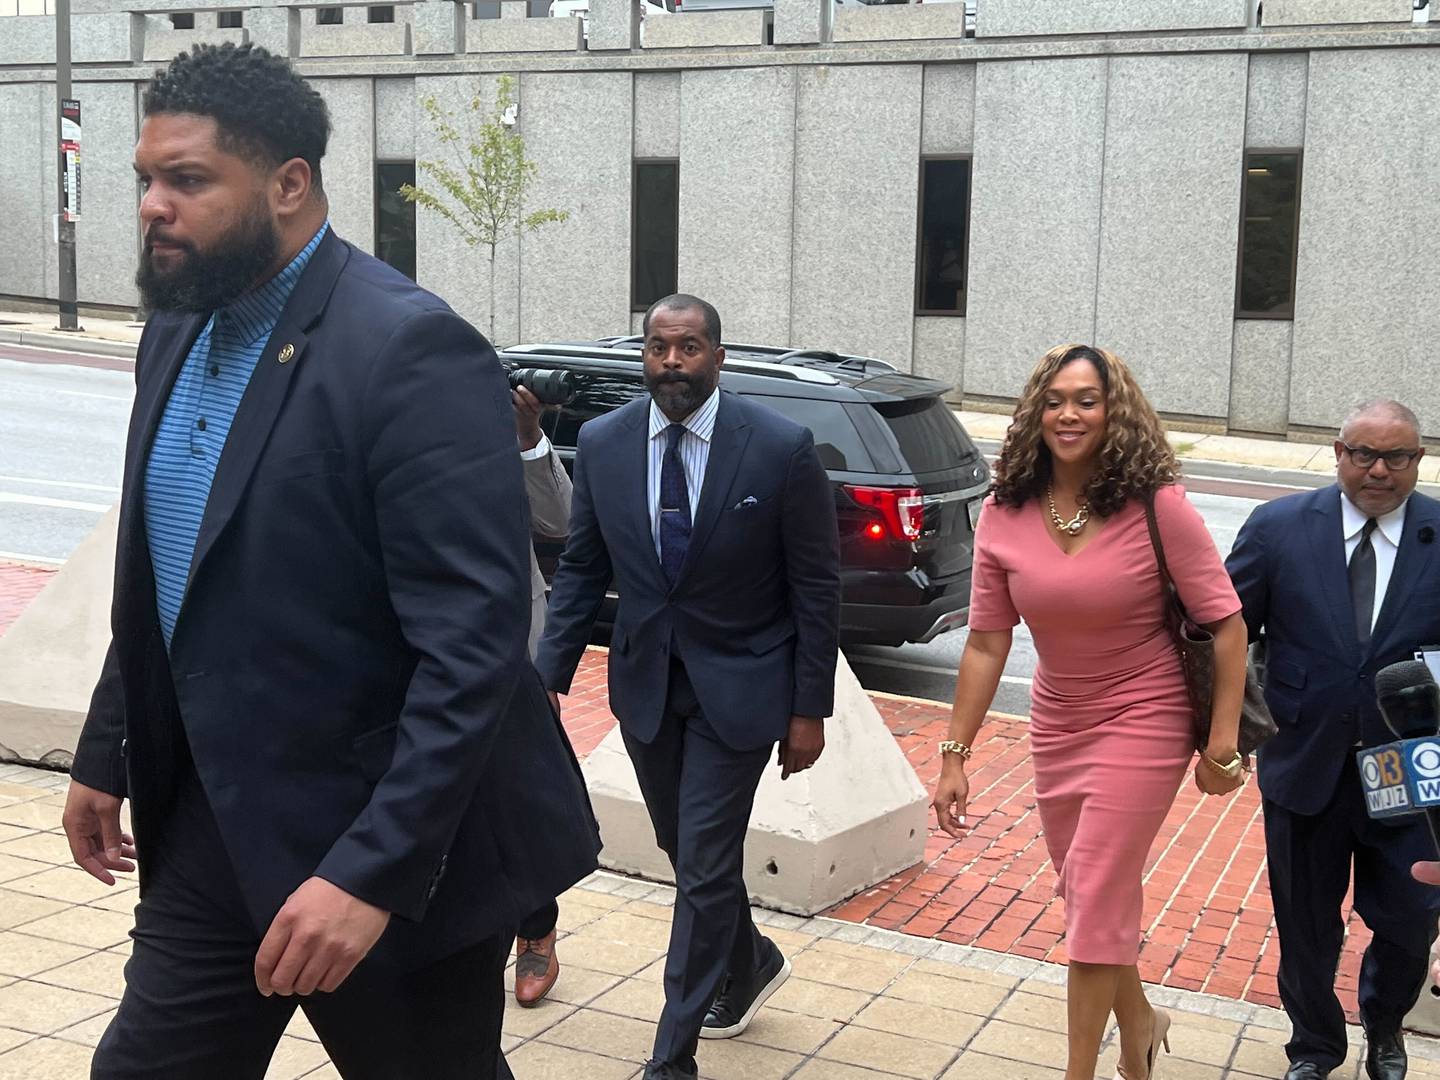 Marilyn Mosby and her husband Nick attend a hearing ahead of her federal trial on perjury charges later this month.